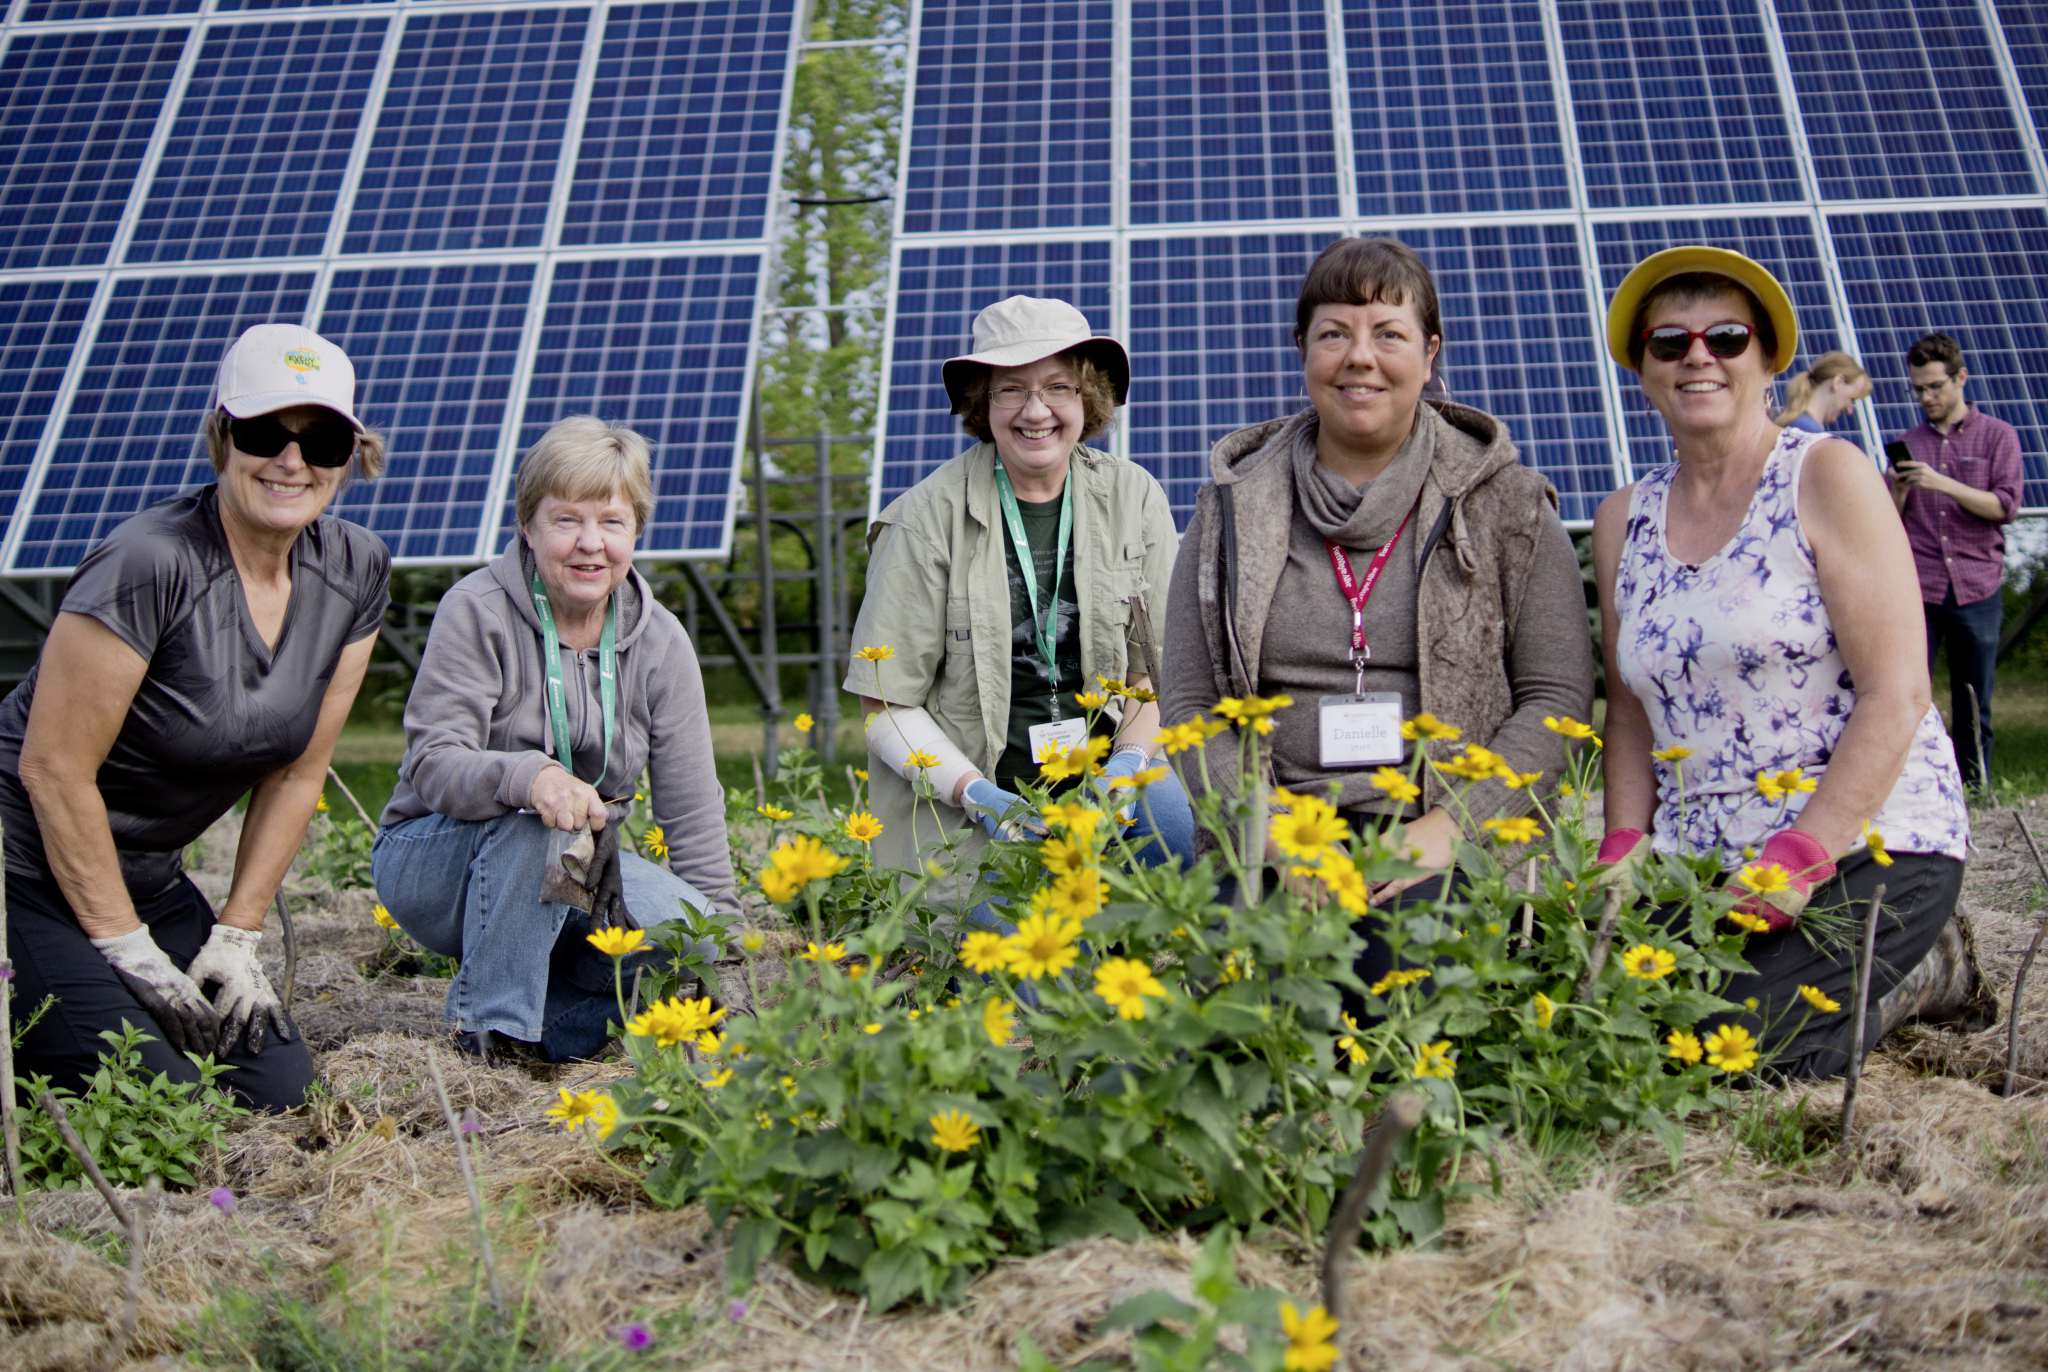 FortWhyte staff and volunteers planting flowers in front of the solar panels